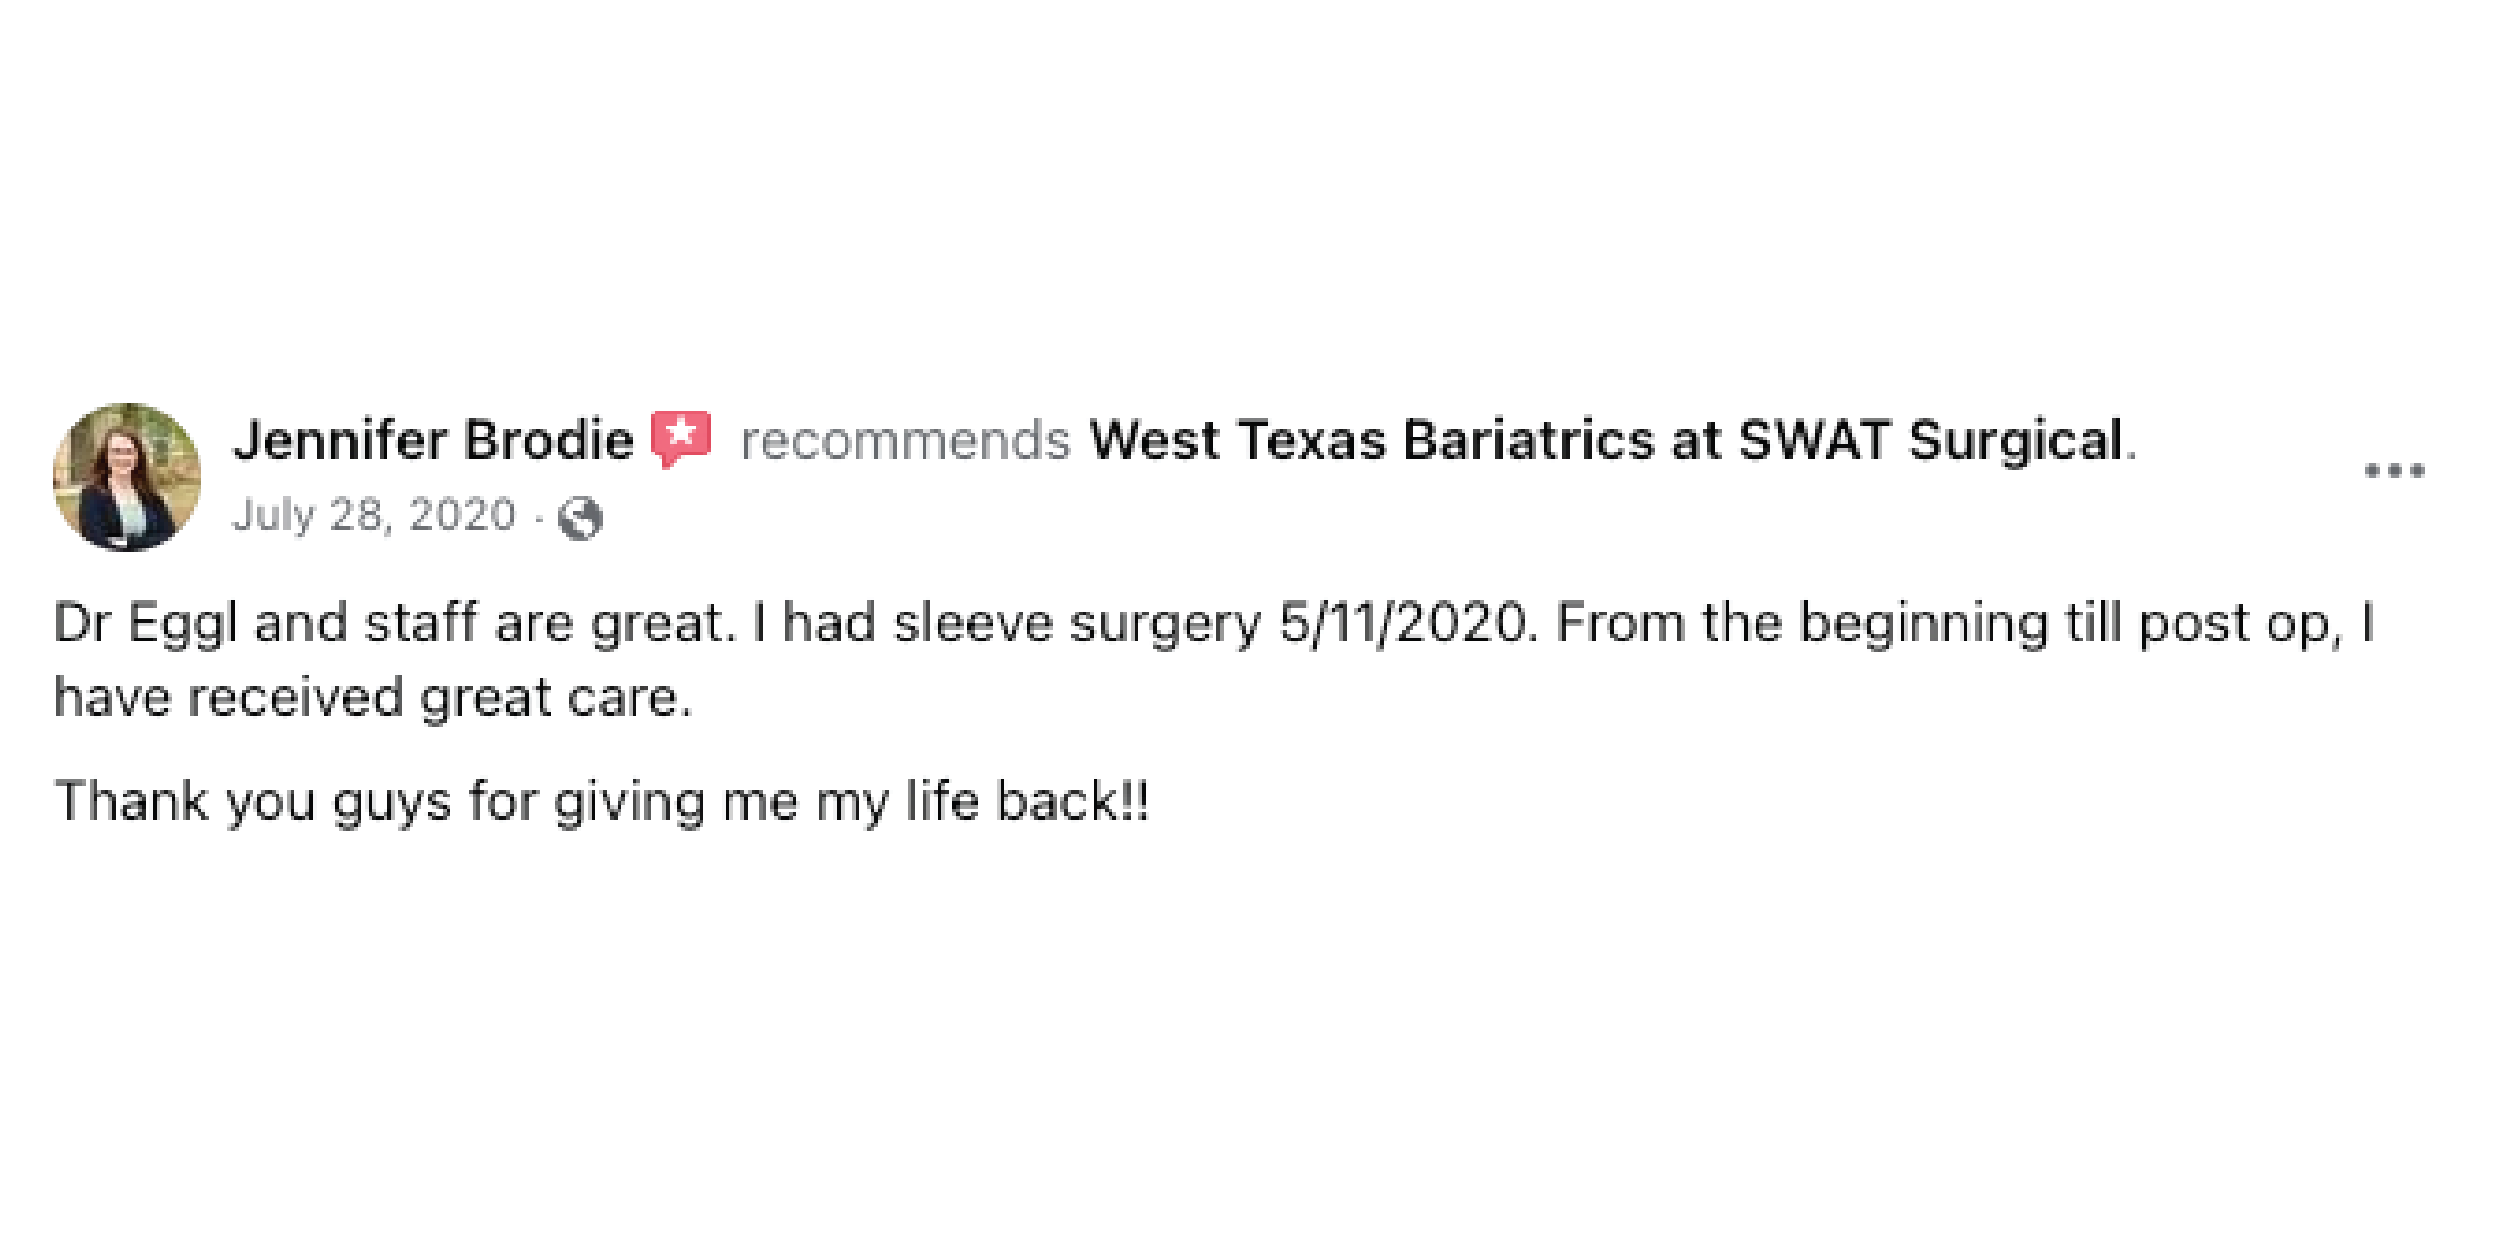 Patients' review of their sleeve surgery at West Texas Bariatrics